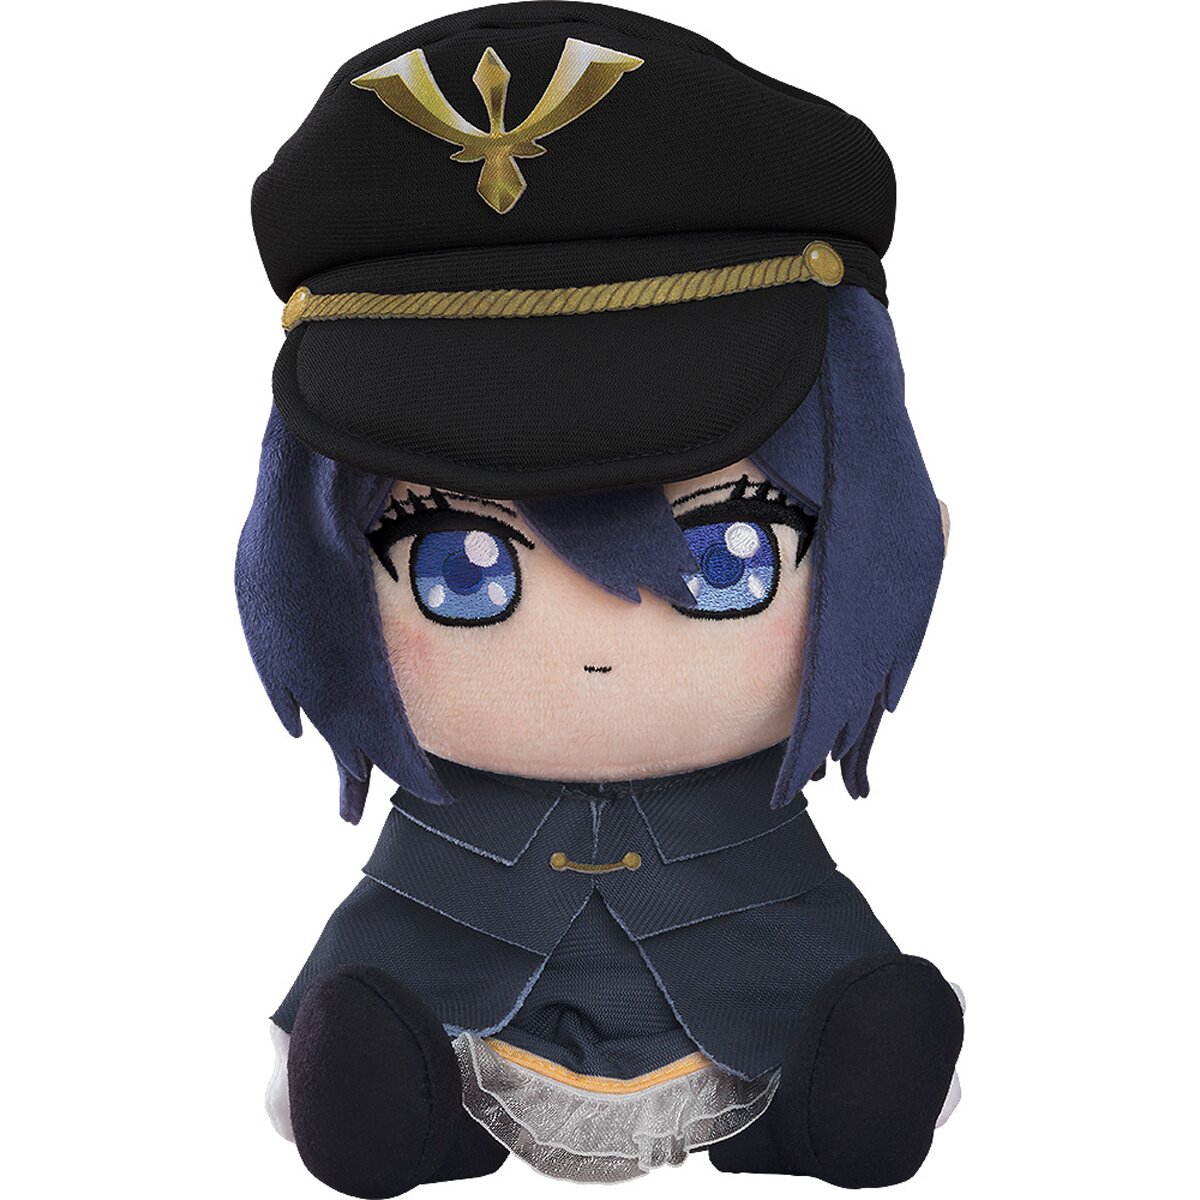 My Dress-Up Darling Plushie Black Lily: Good Smile Company 38% OFF